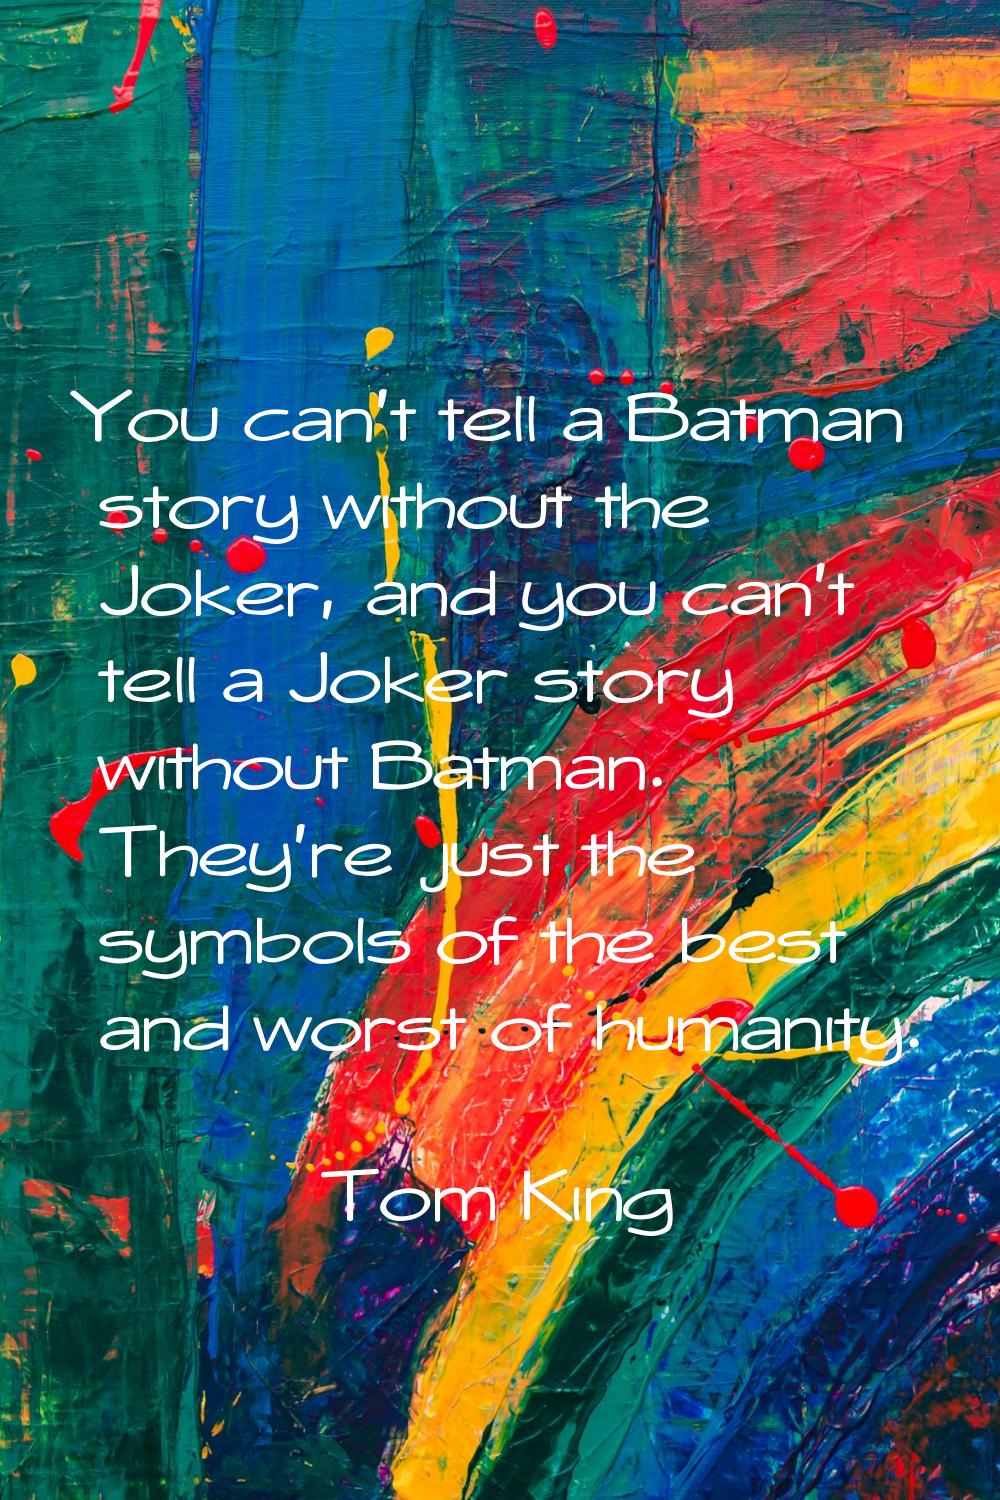 You can't tell a Batman story without the Joker, and you can't tell a Joker story without Batman. T